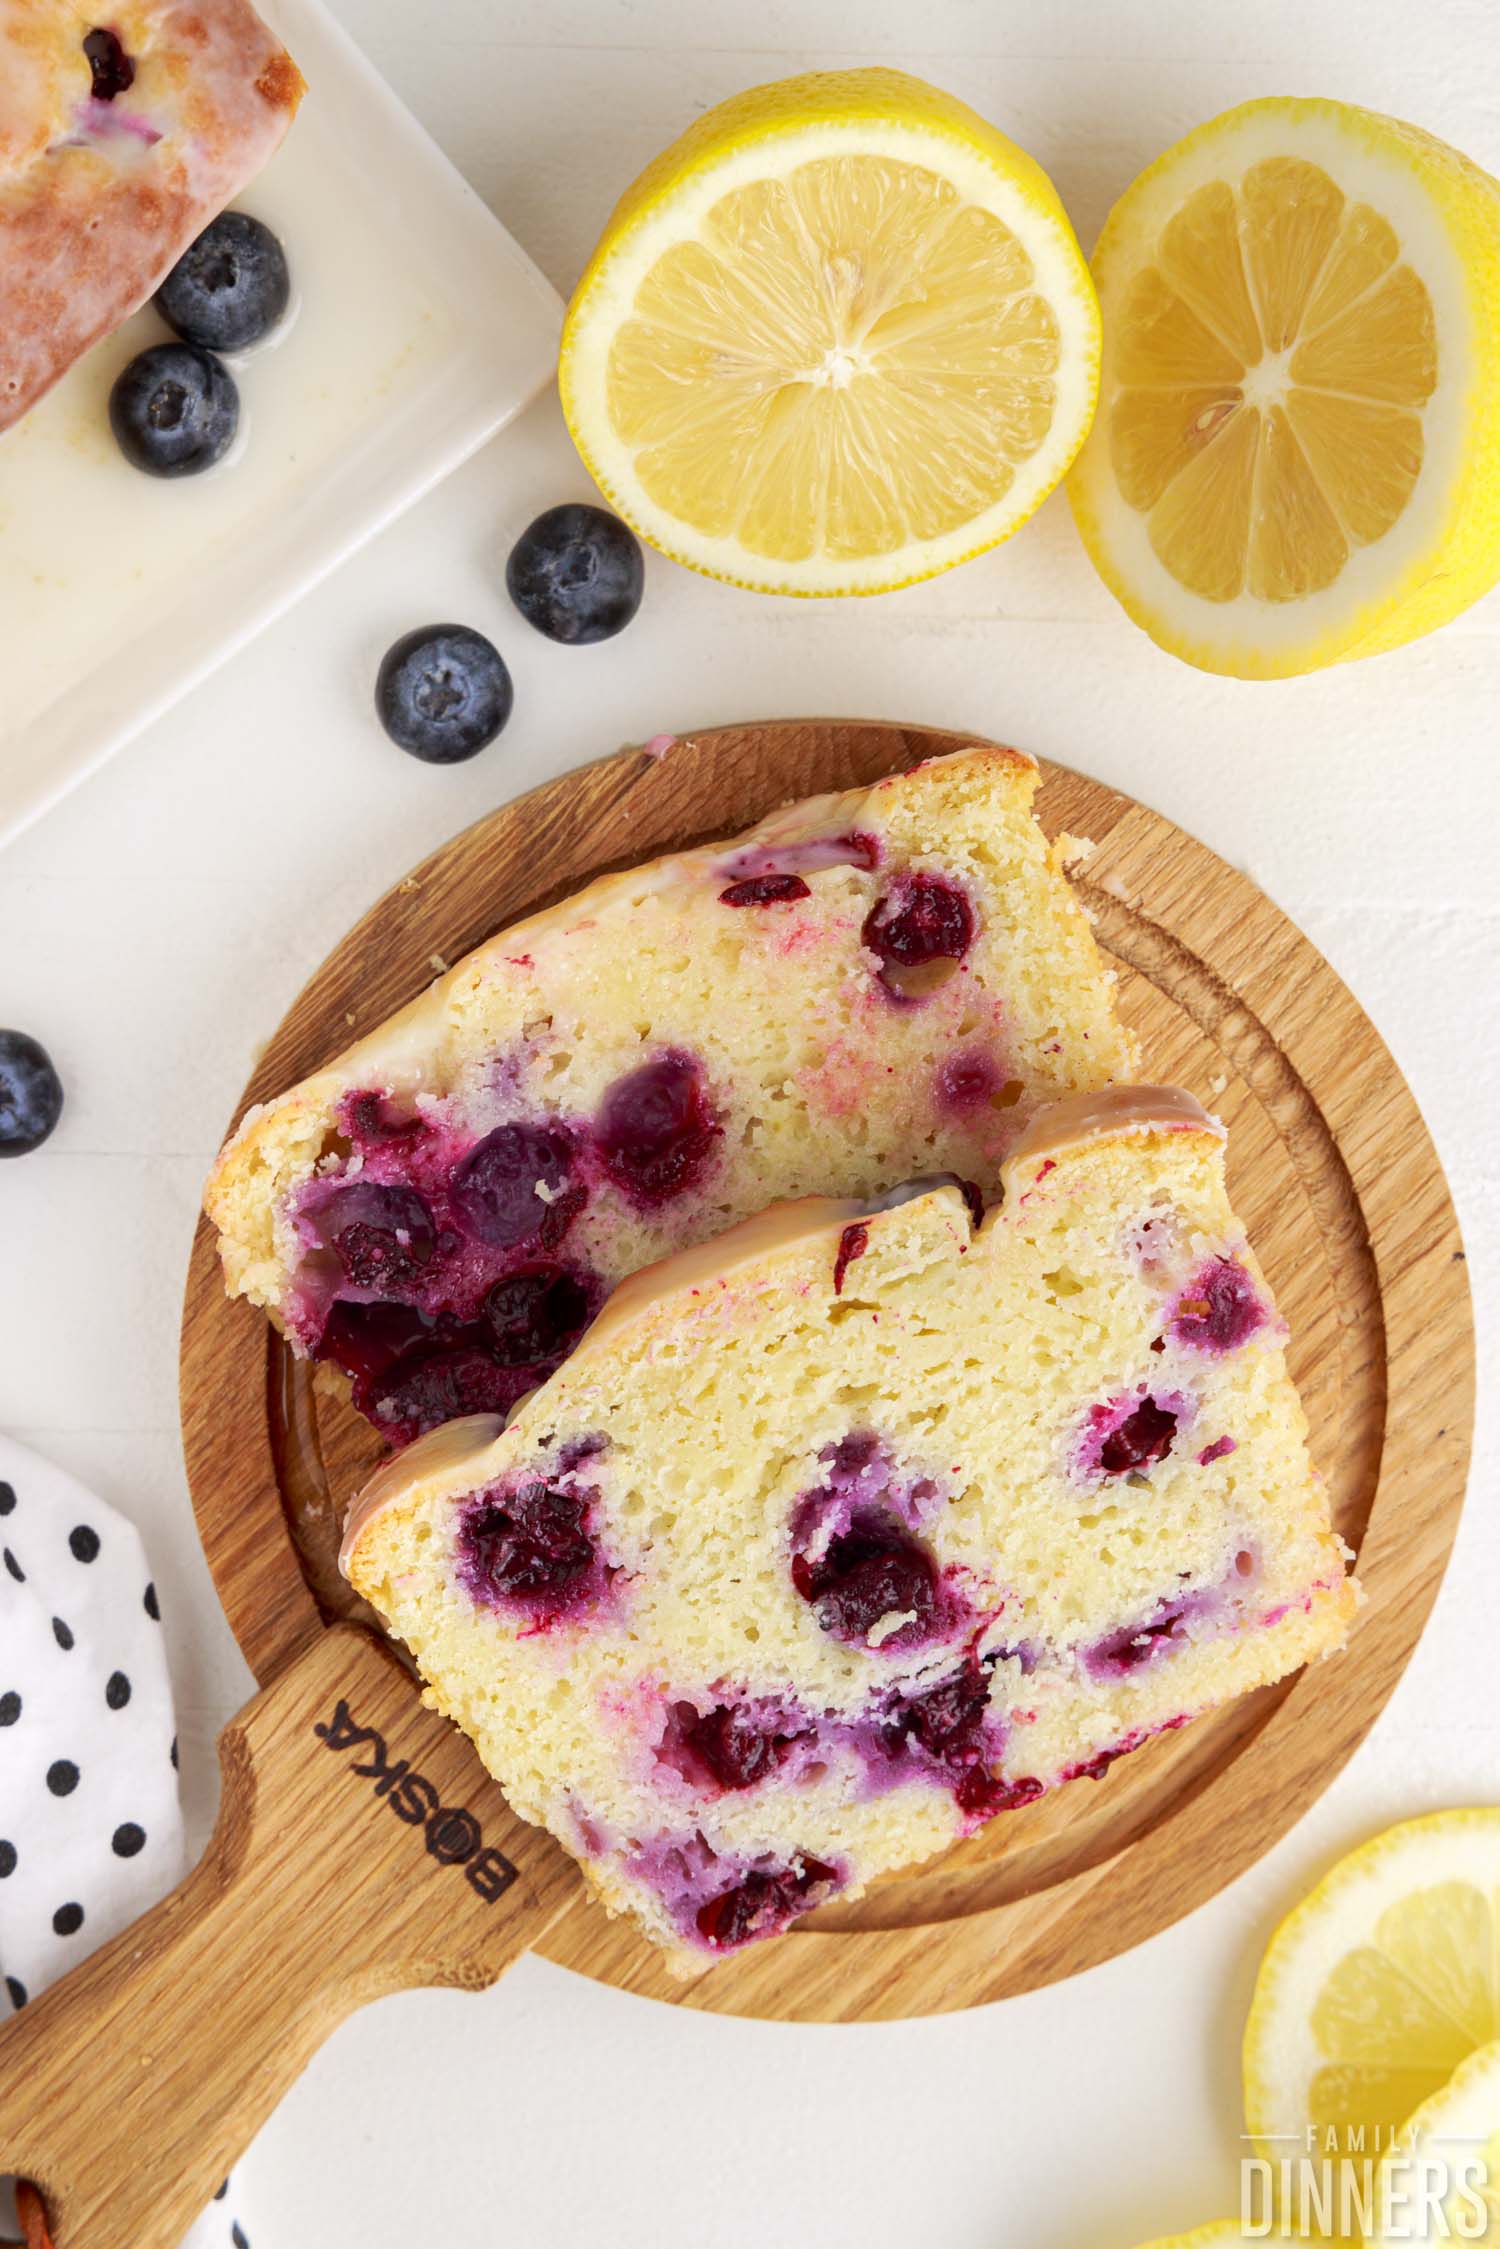 A slice of lemon blueberry bread on a cutting board next to a sliced lemon and some blueberries.